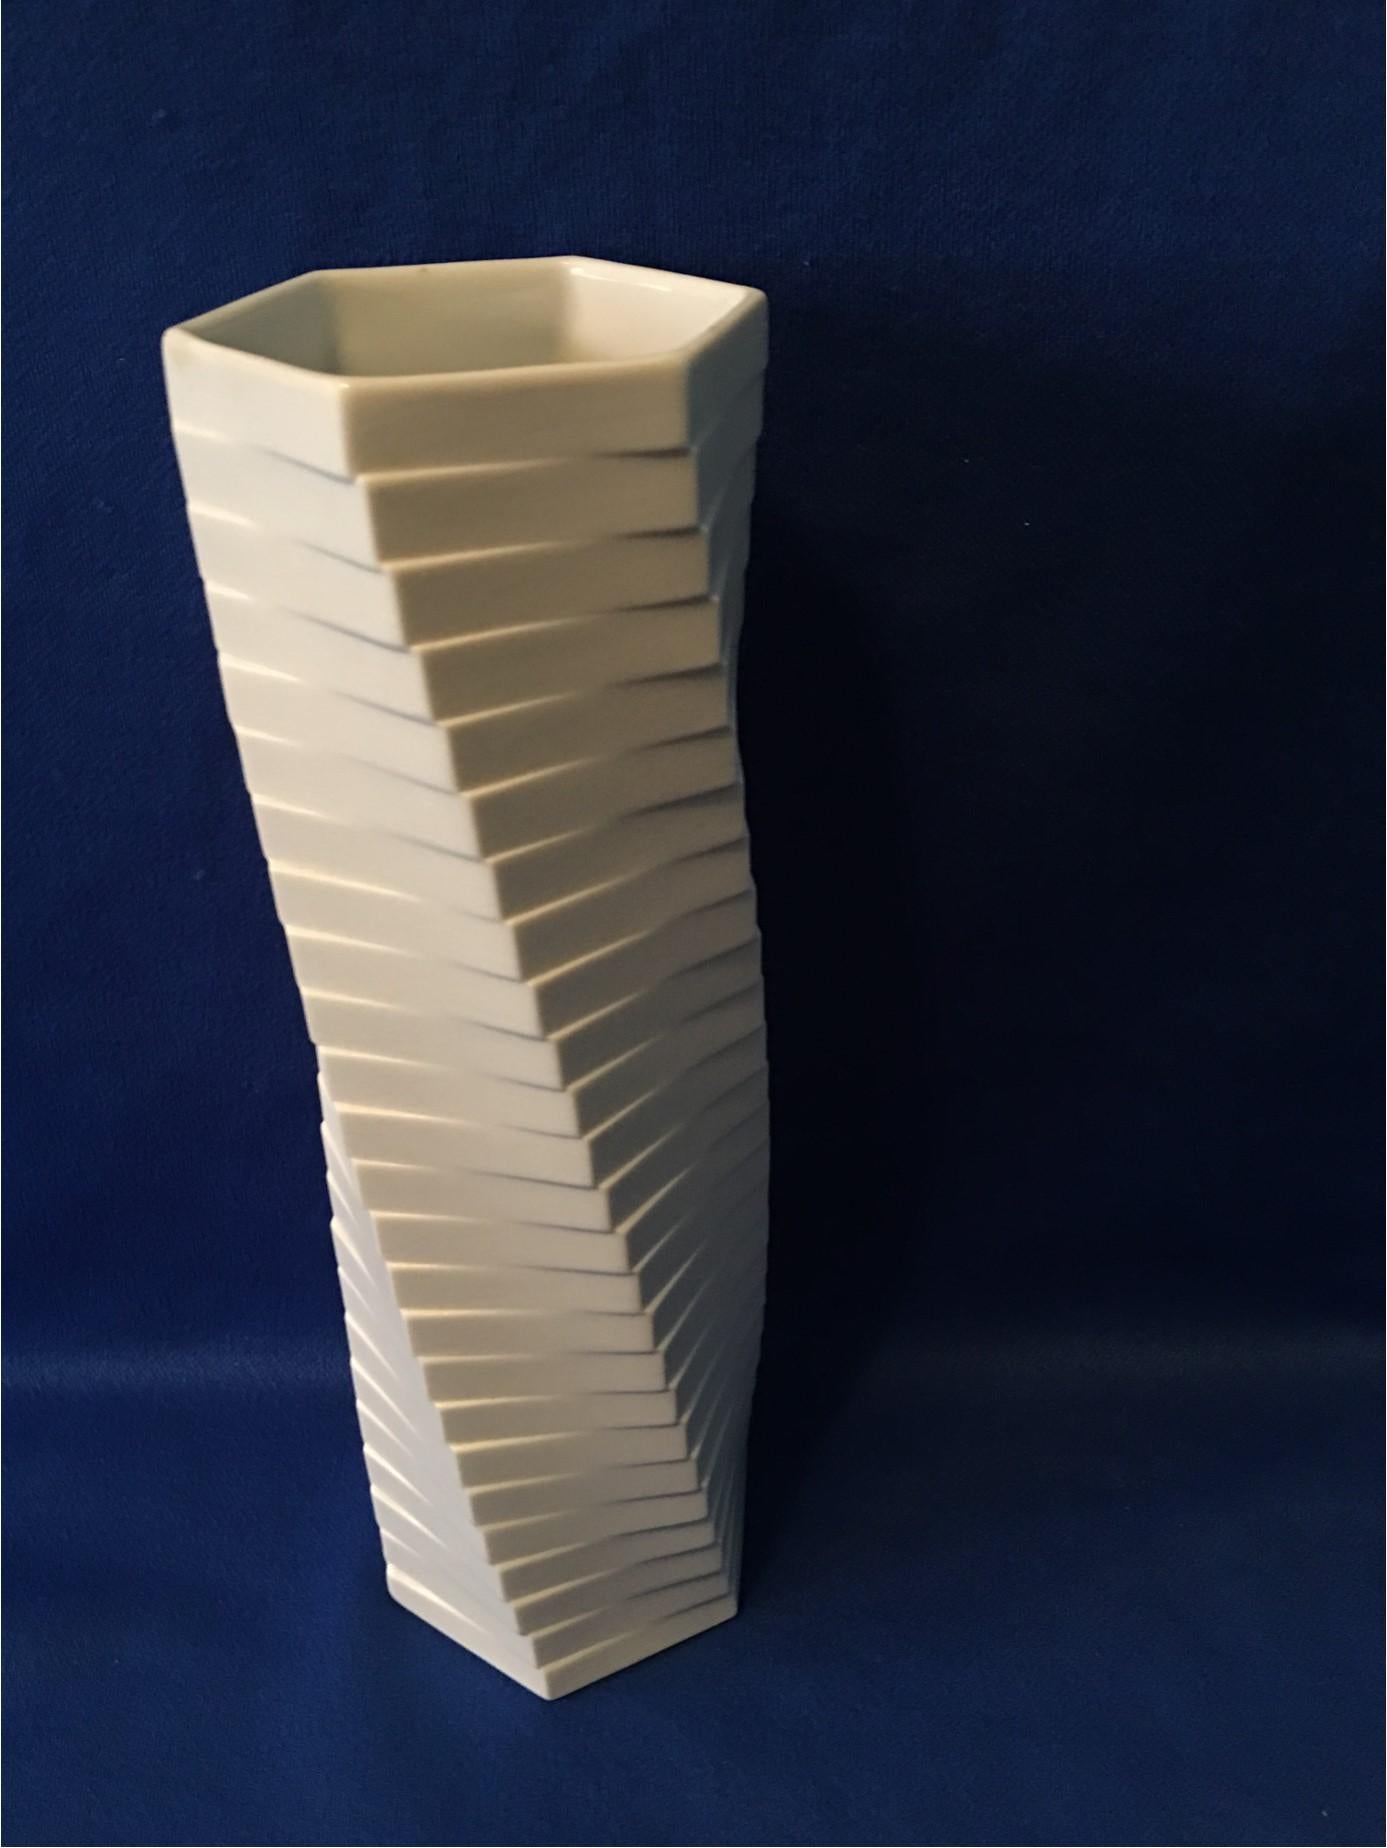 A lovely white matte Vase which has been designed to resemble the leaning tower of Pisa by employing a turning geometrical design. Designer Werner Uhl managed to capture the essence and the spirit of this famous landmark in this beautiful Vase